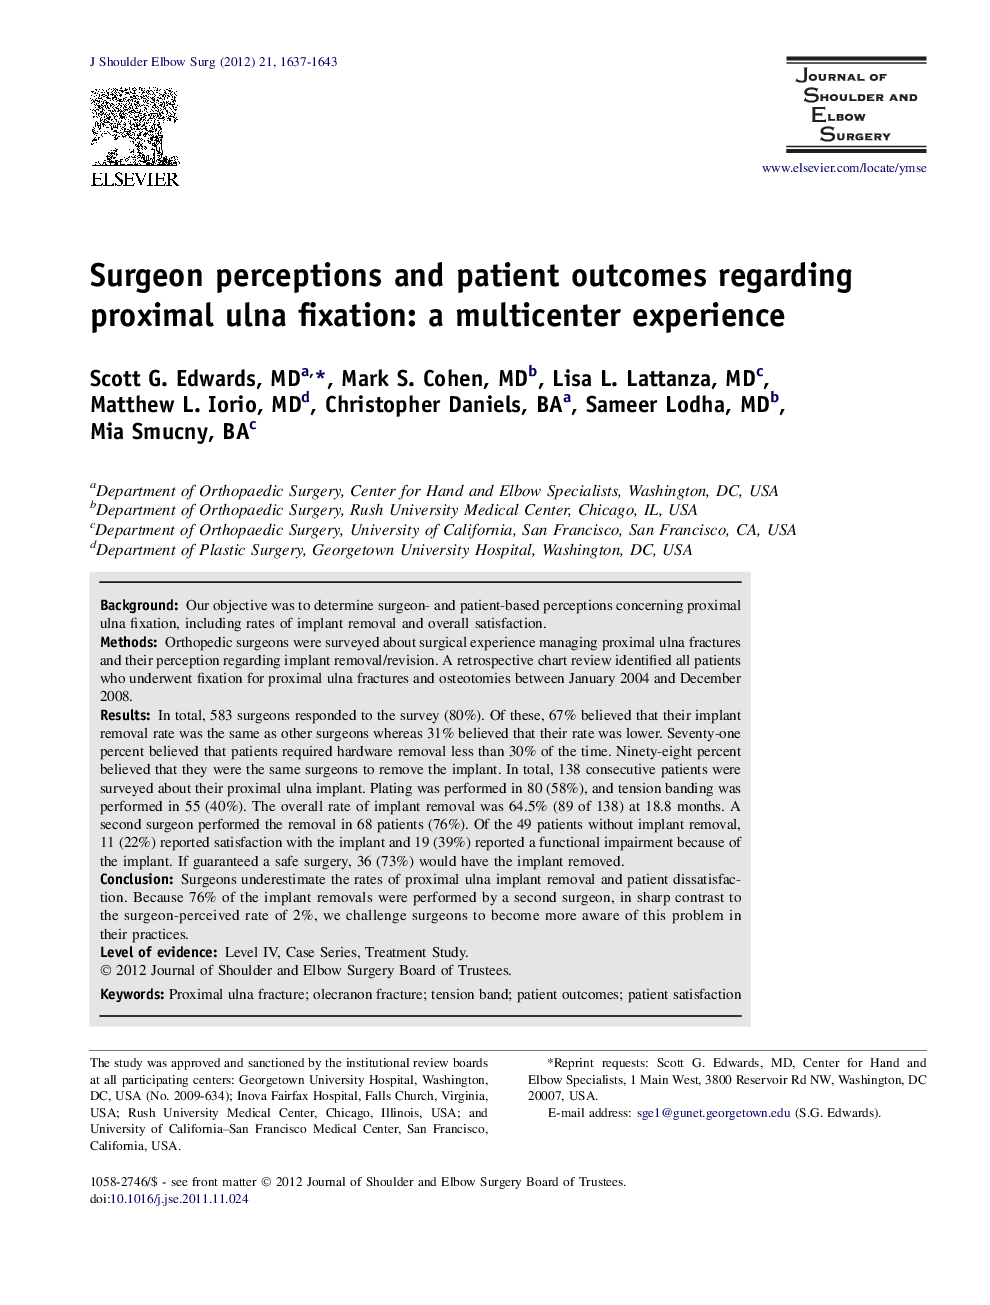 Surgeon perceptions and patient outcomes regarding proximal ulna fixation: a multicenter experience 